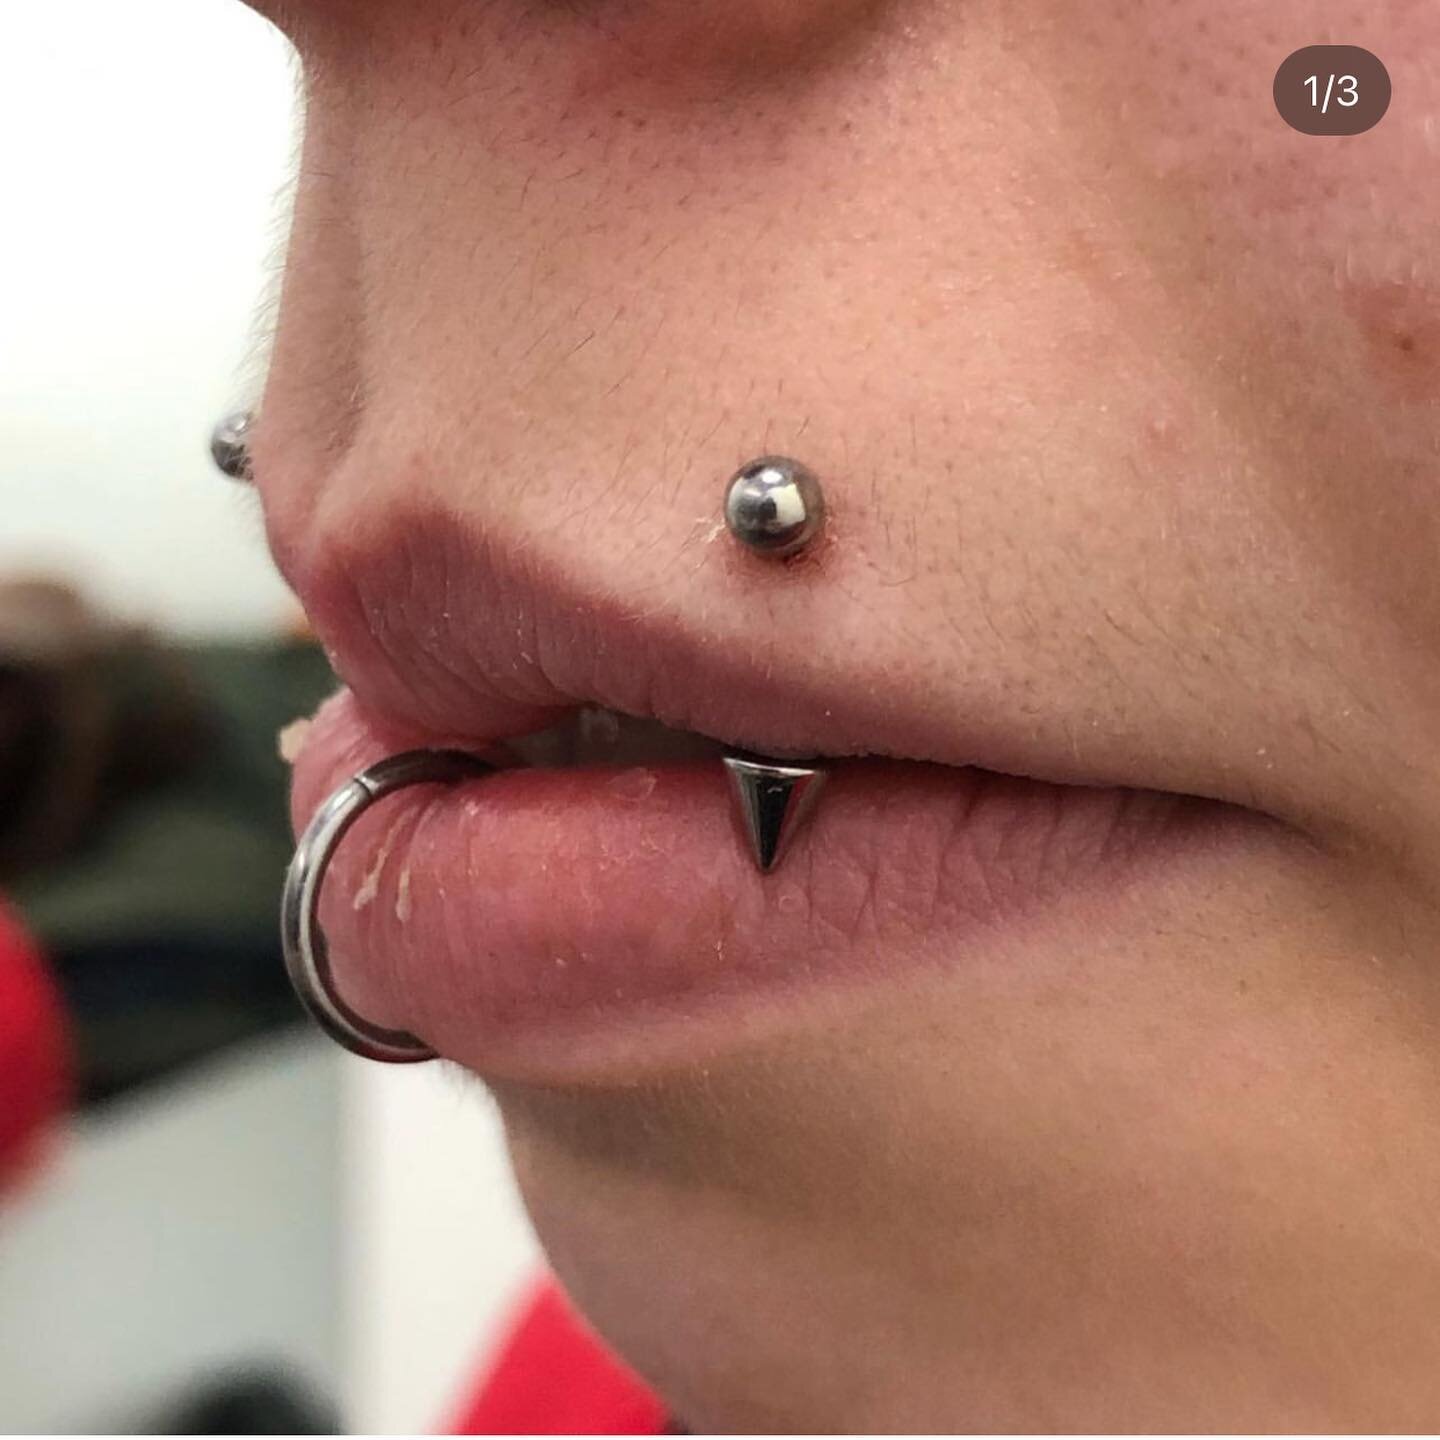 Some awesome piercings by the great @sinsandneedlesbodypiercing ! Book in via their website for all of your piercing needs! #piercing #piercings #like #follow #love #photography #photo #photooftheday #tattoo #tattoos